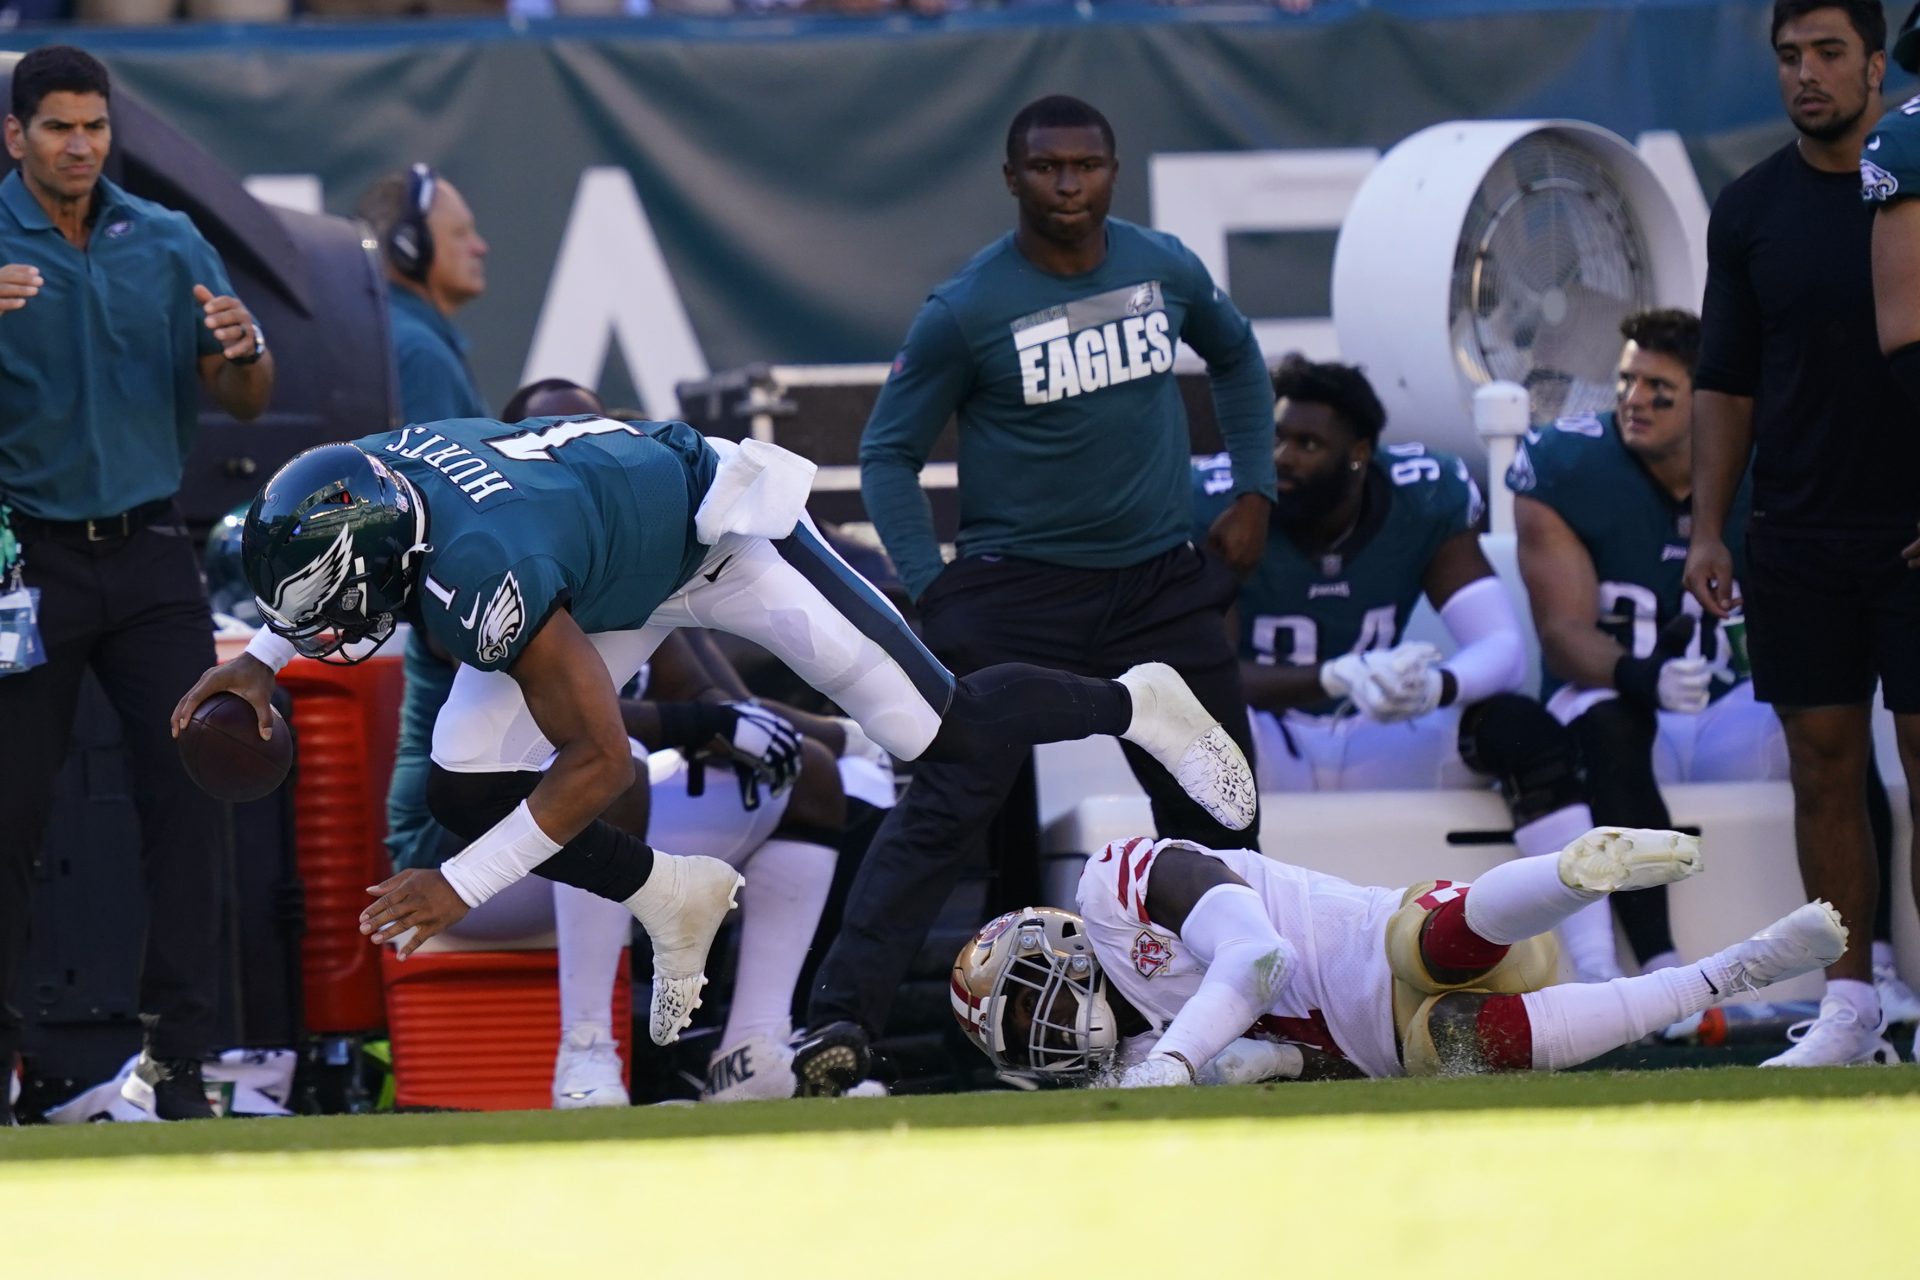 Philadelphia Eagles quarterback Jalen Hurts (1) falls with the ball during the second half of an NFL football game against the San Francisco 49ers on Sunday, Sept. 19, 2021, in Philadelphia.